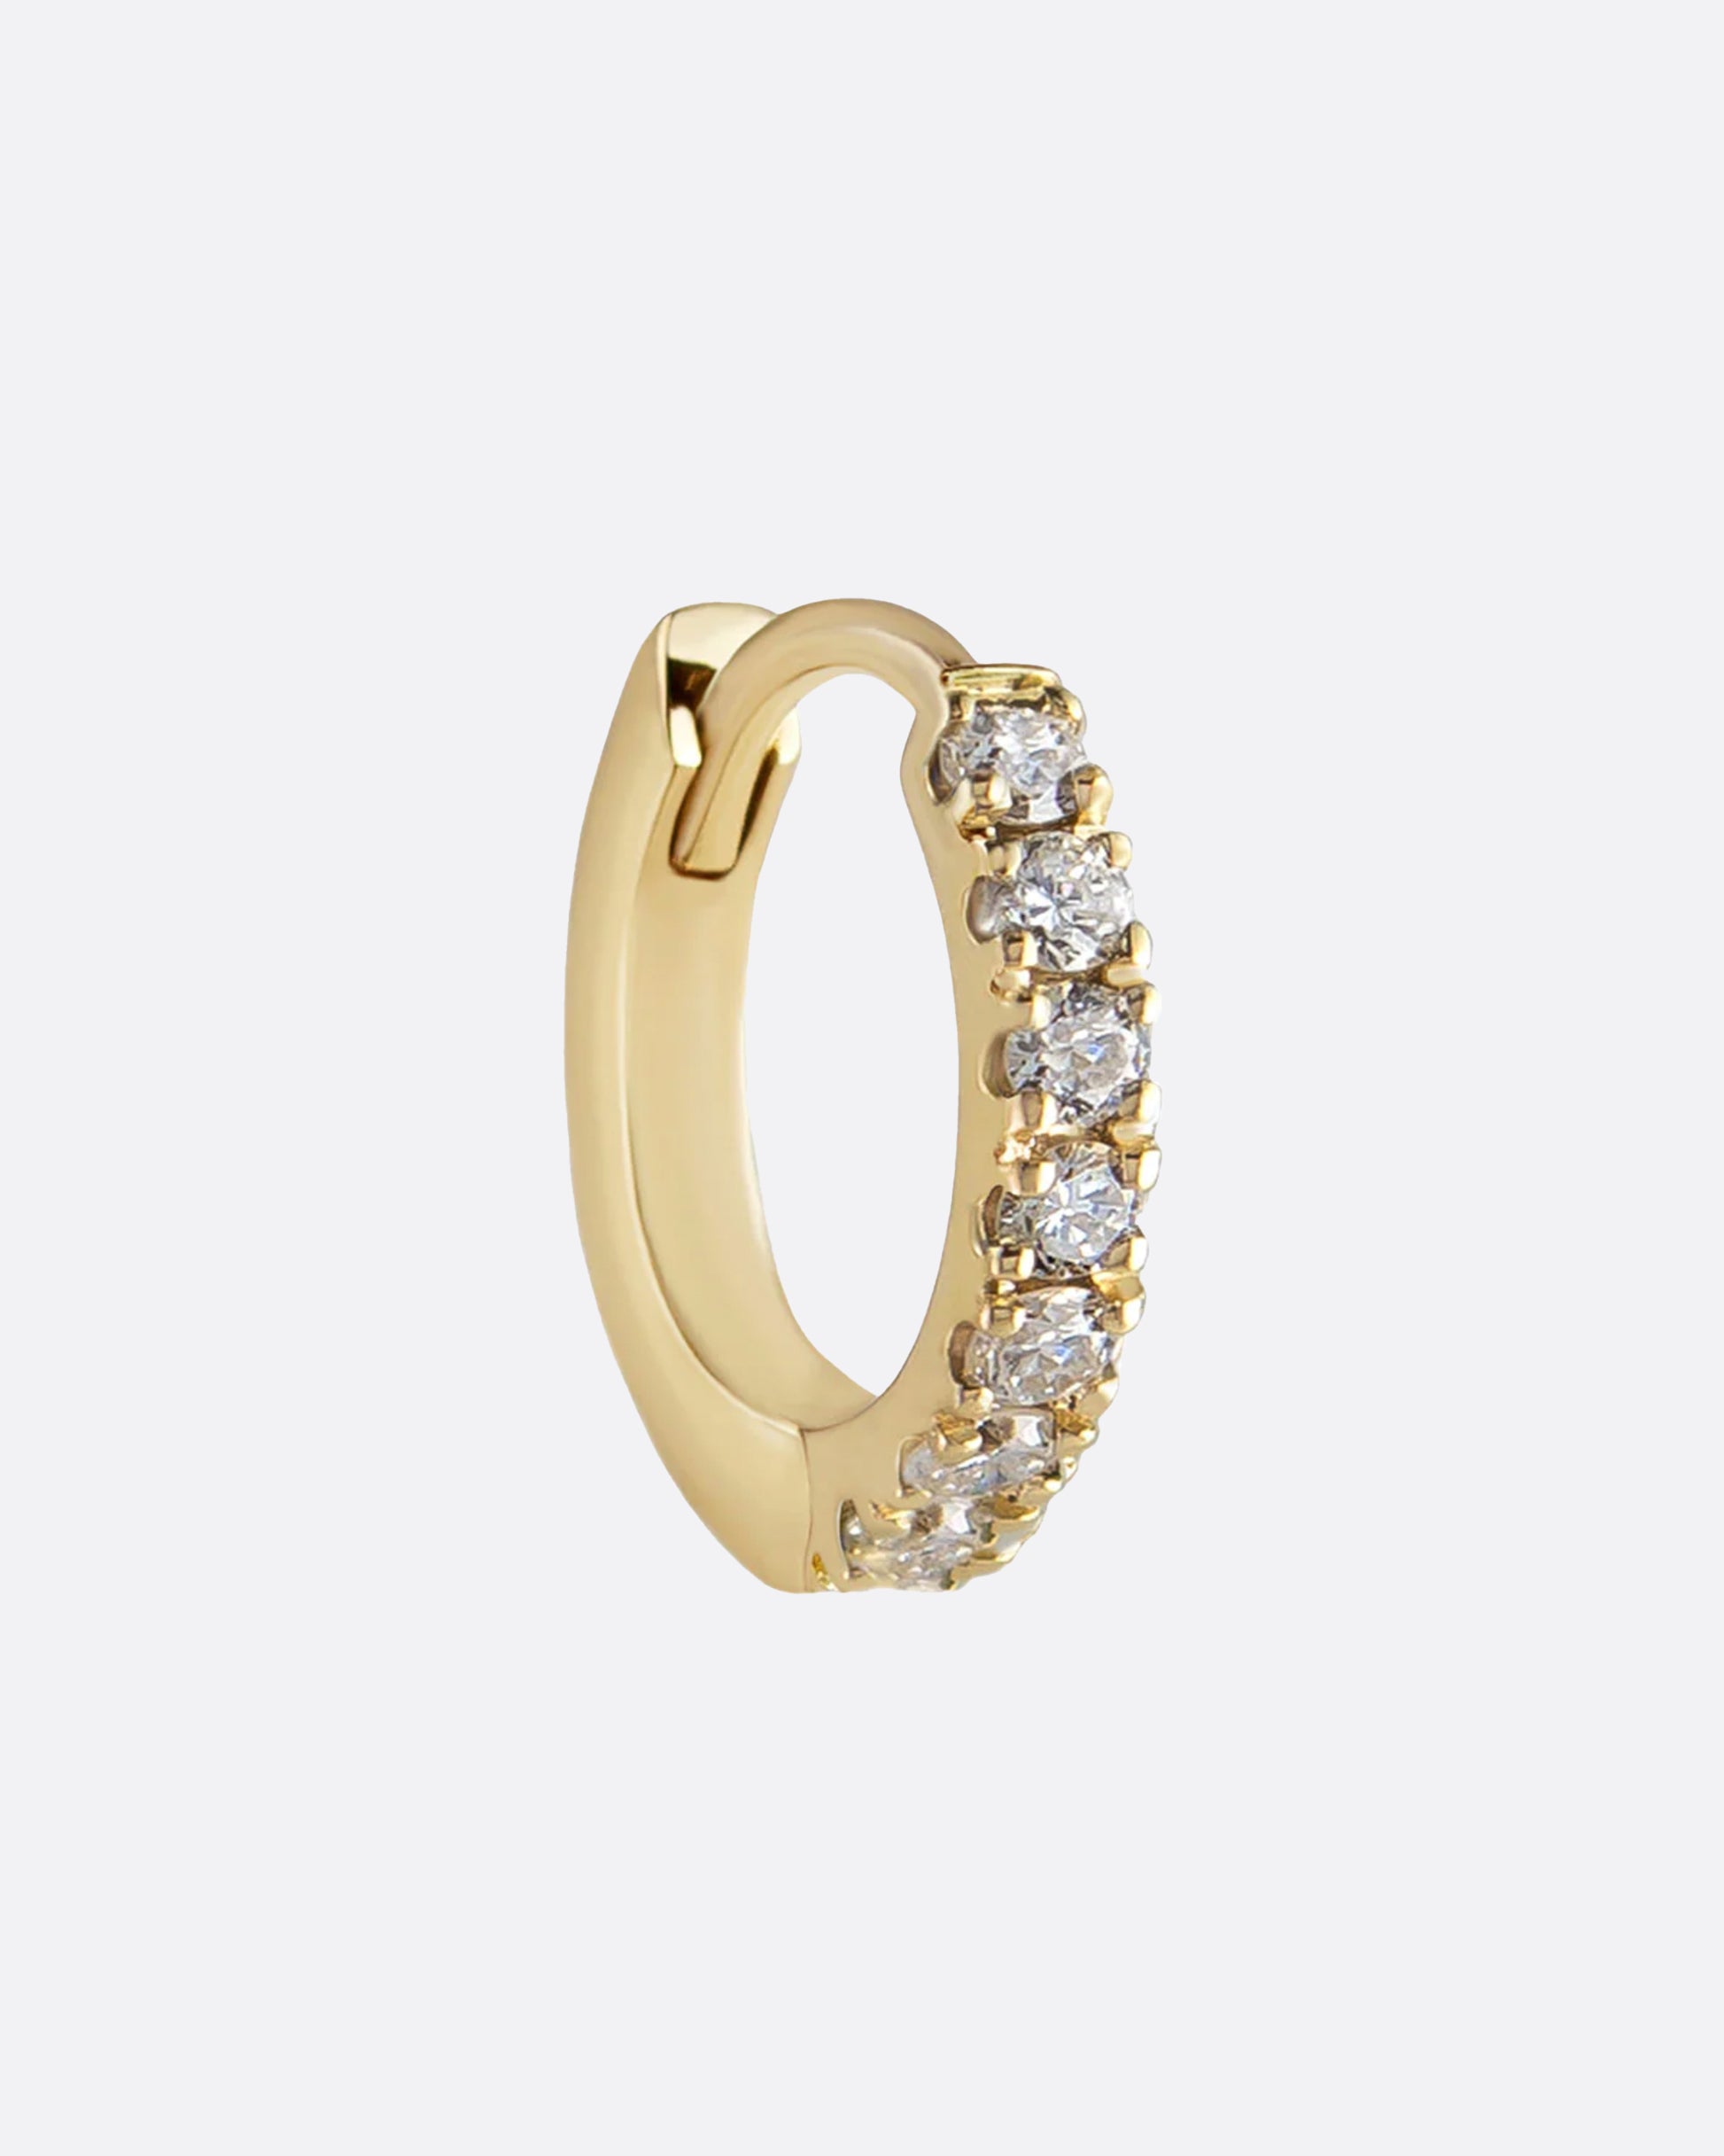 The quintessential, small, diamond hoop; a piece you'll be happy to have in your arsenal.